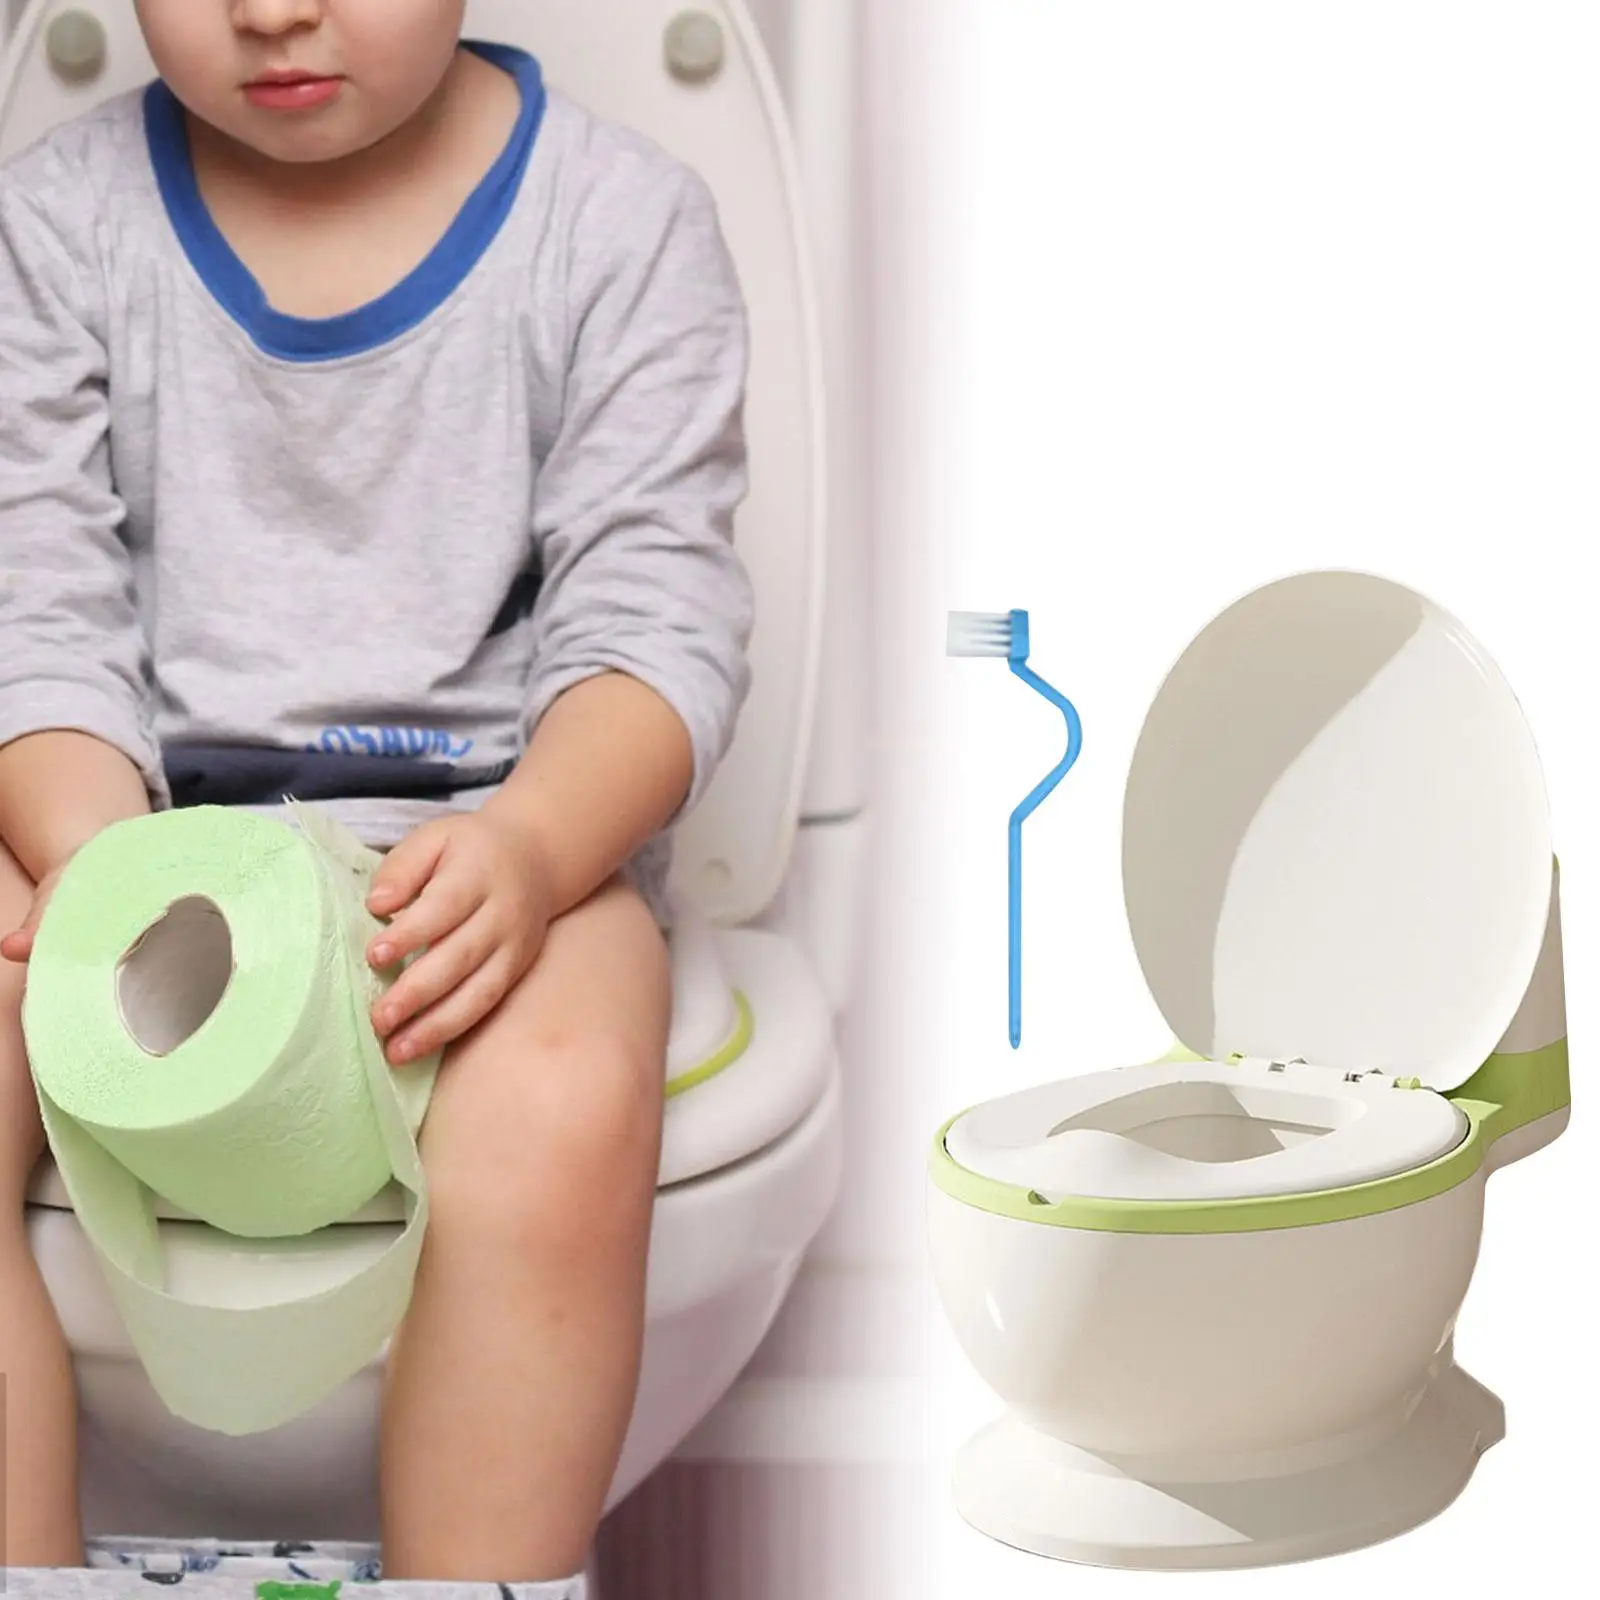 Baby Potty Toilet with Wipe Storage Includes Cleaning Brush Easily to Clean Comfortable Removable Potty Pot for Bedroom Ages 0-7